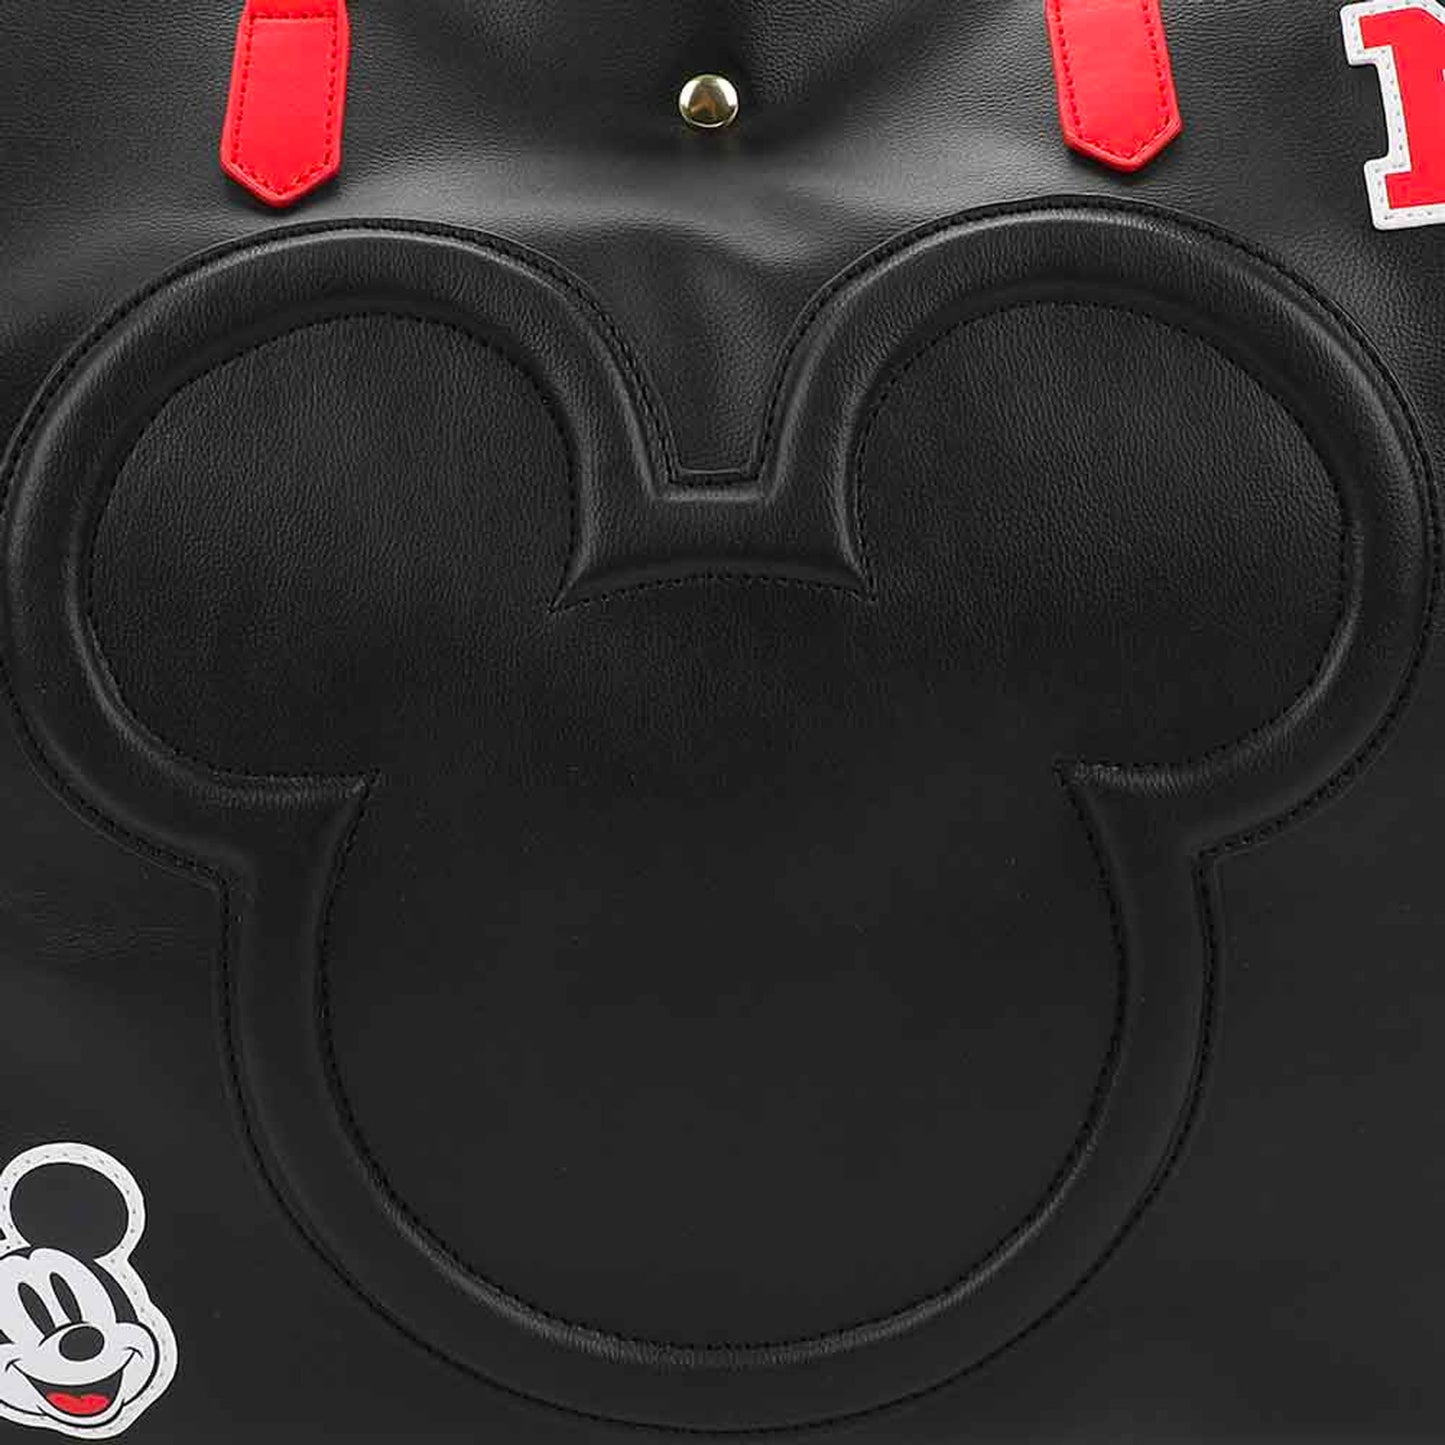 Mickey Mouse (Disney) Patch Tote Bag